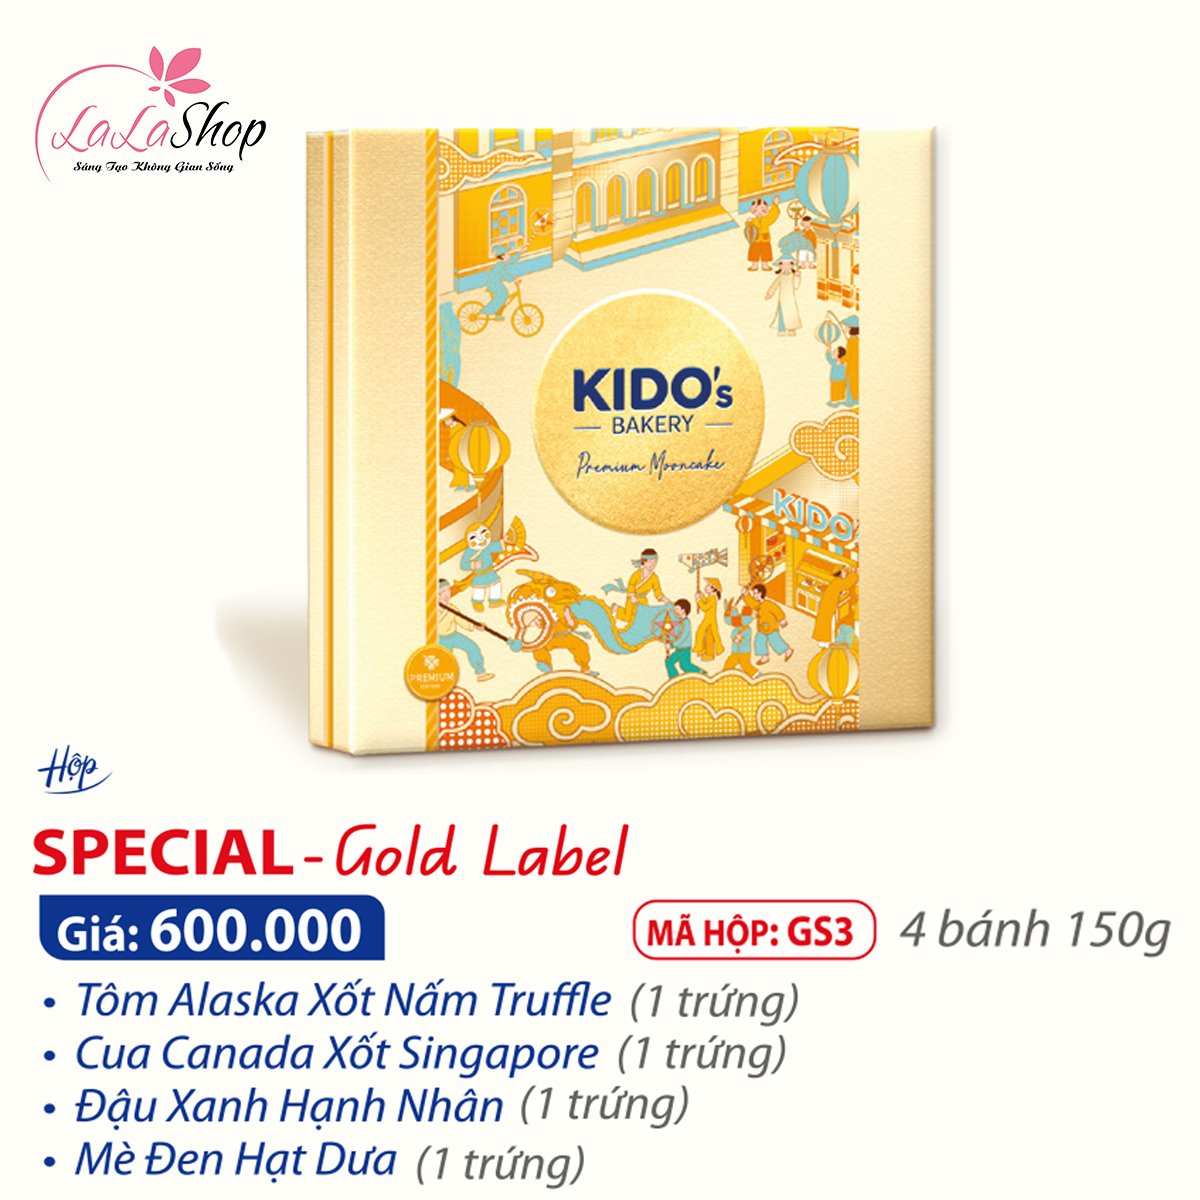 Hộp 4 bánh trung thu Kido cao cấp special - Gold Lable